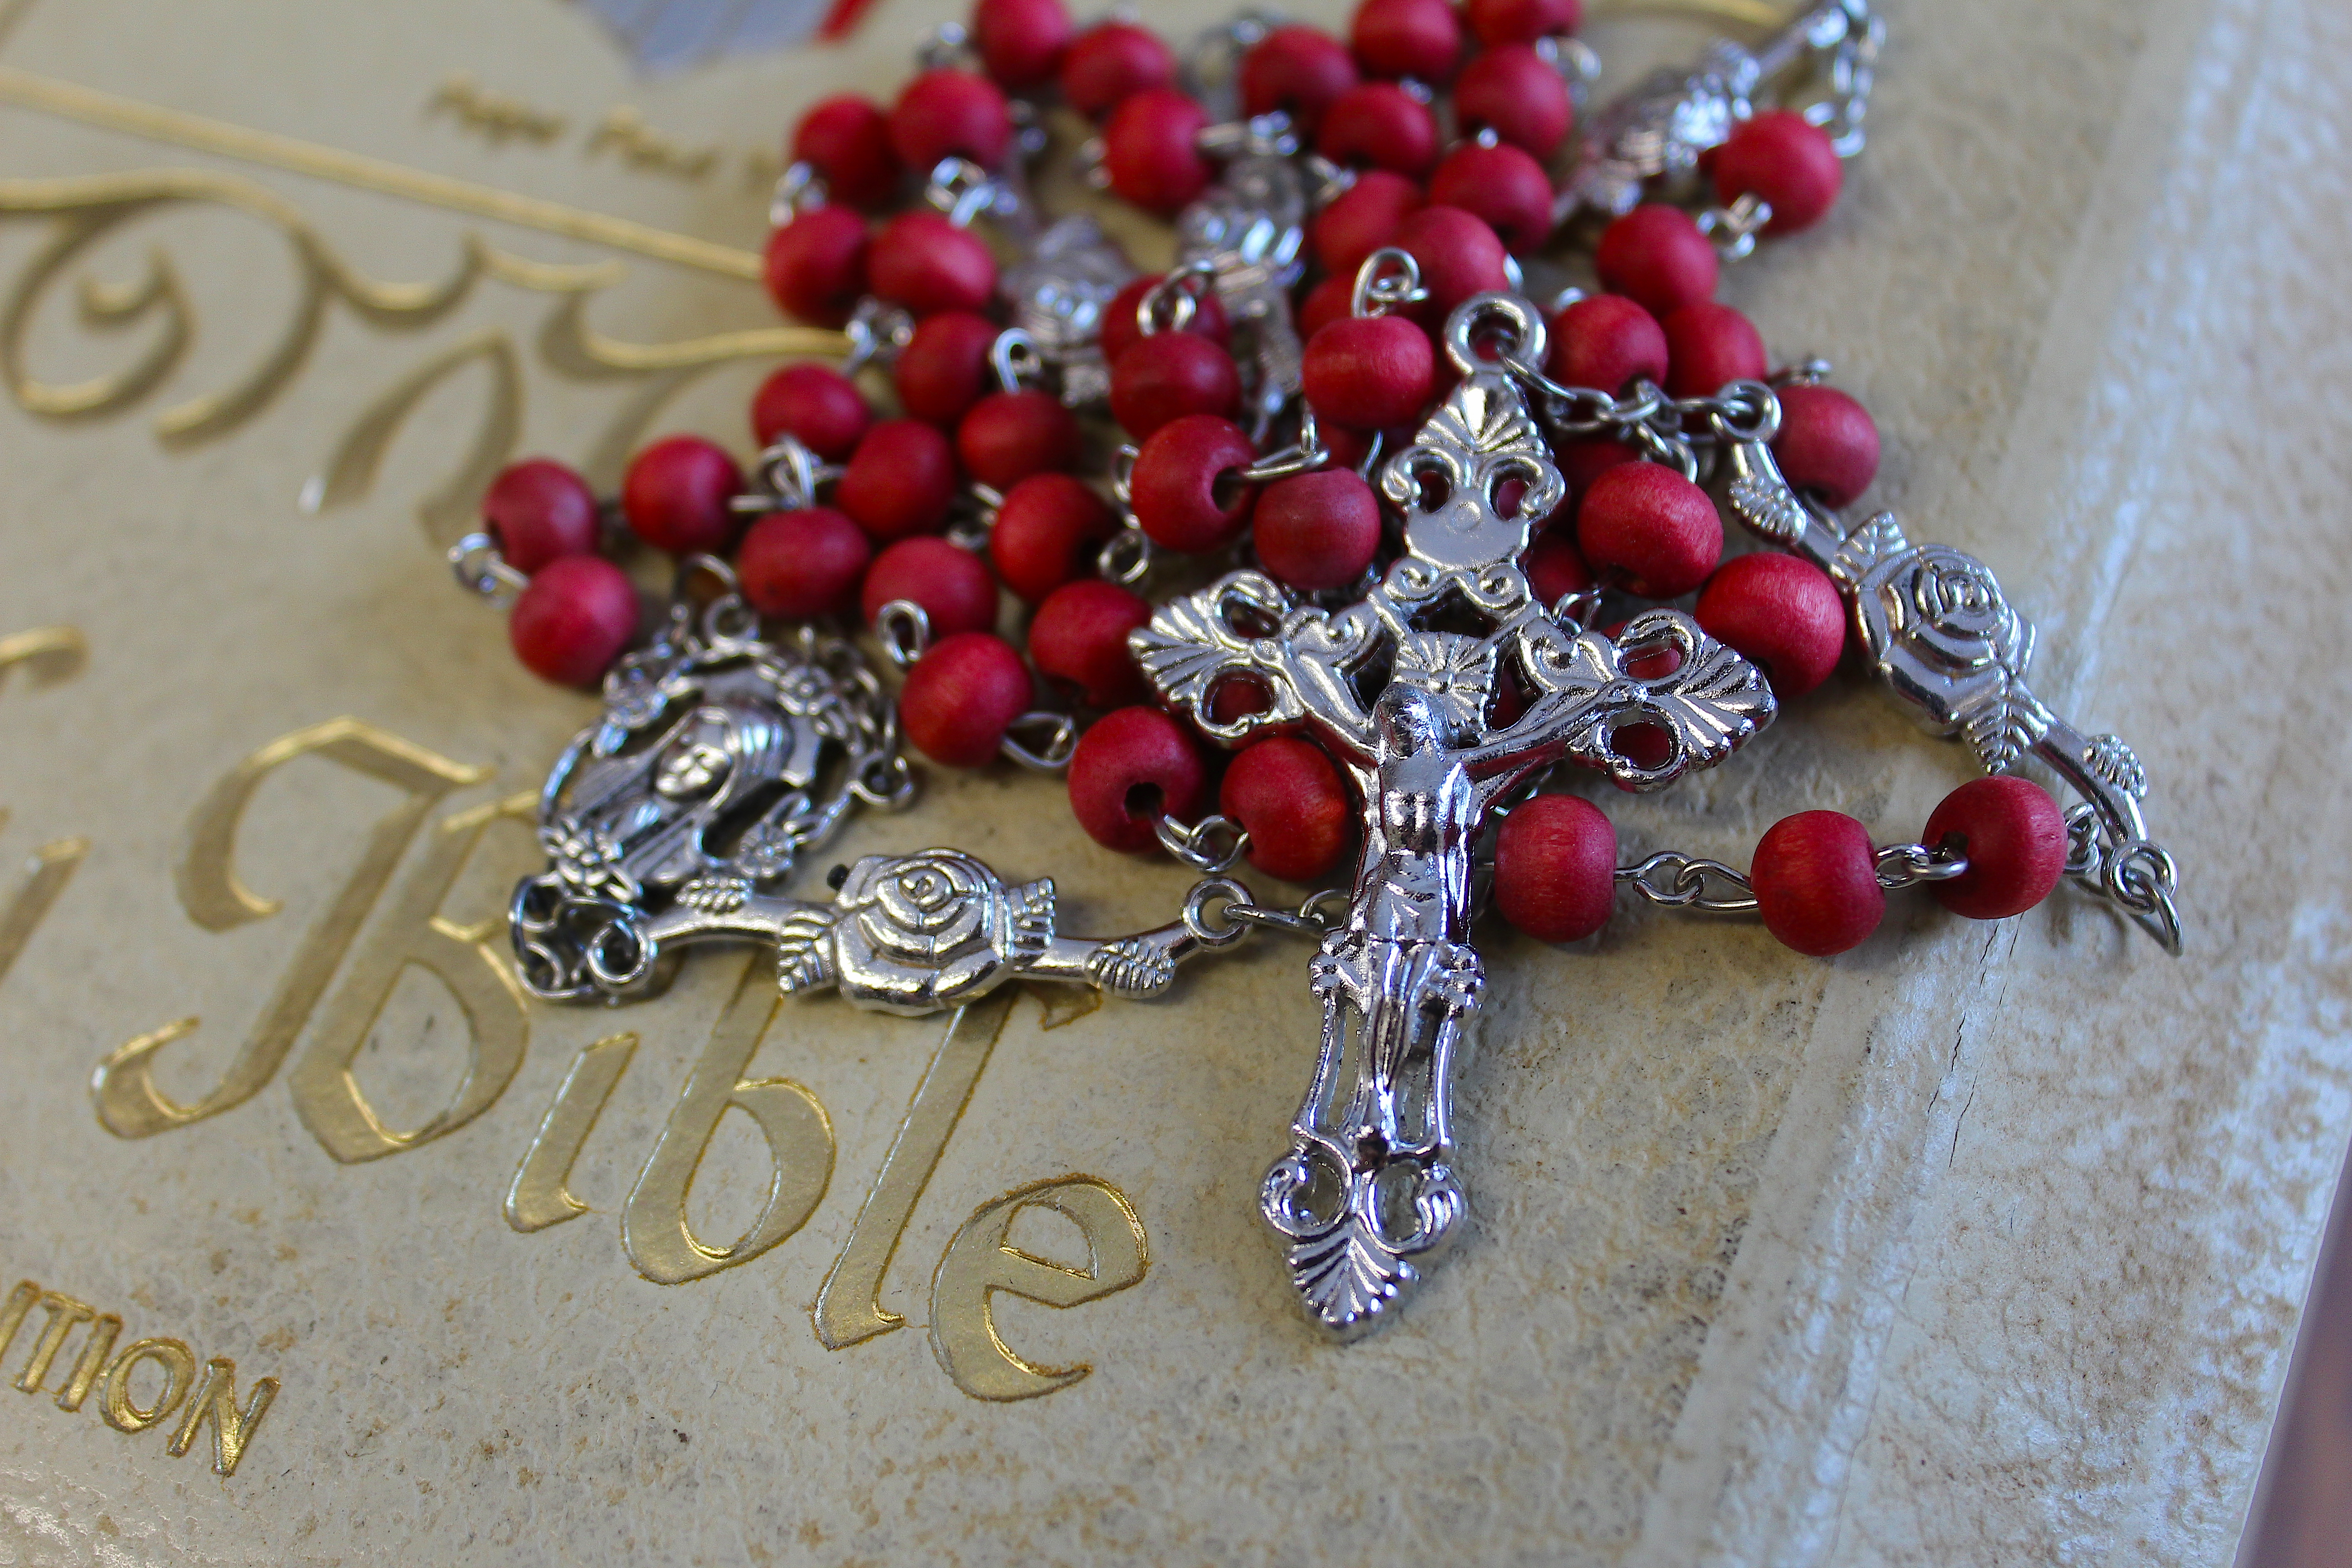 Red bead rosary with silver crucifix and silver details on a vintage white bible with gold lettering